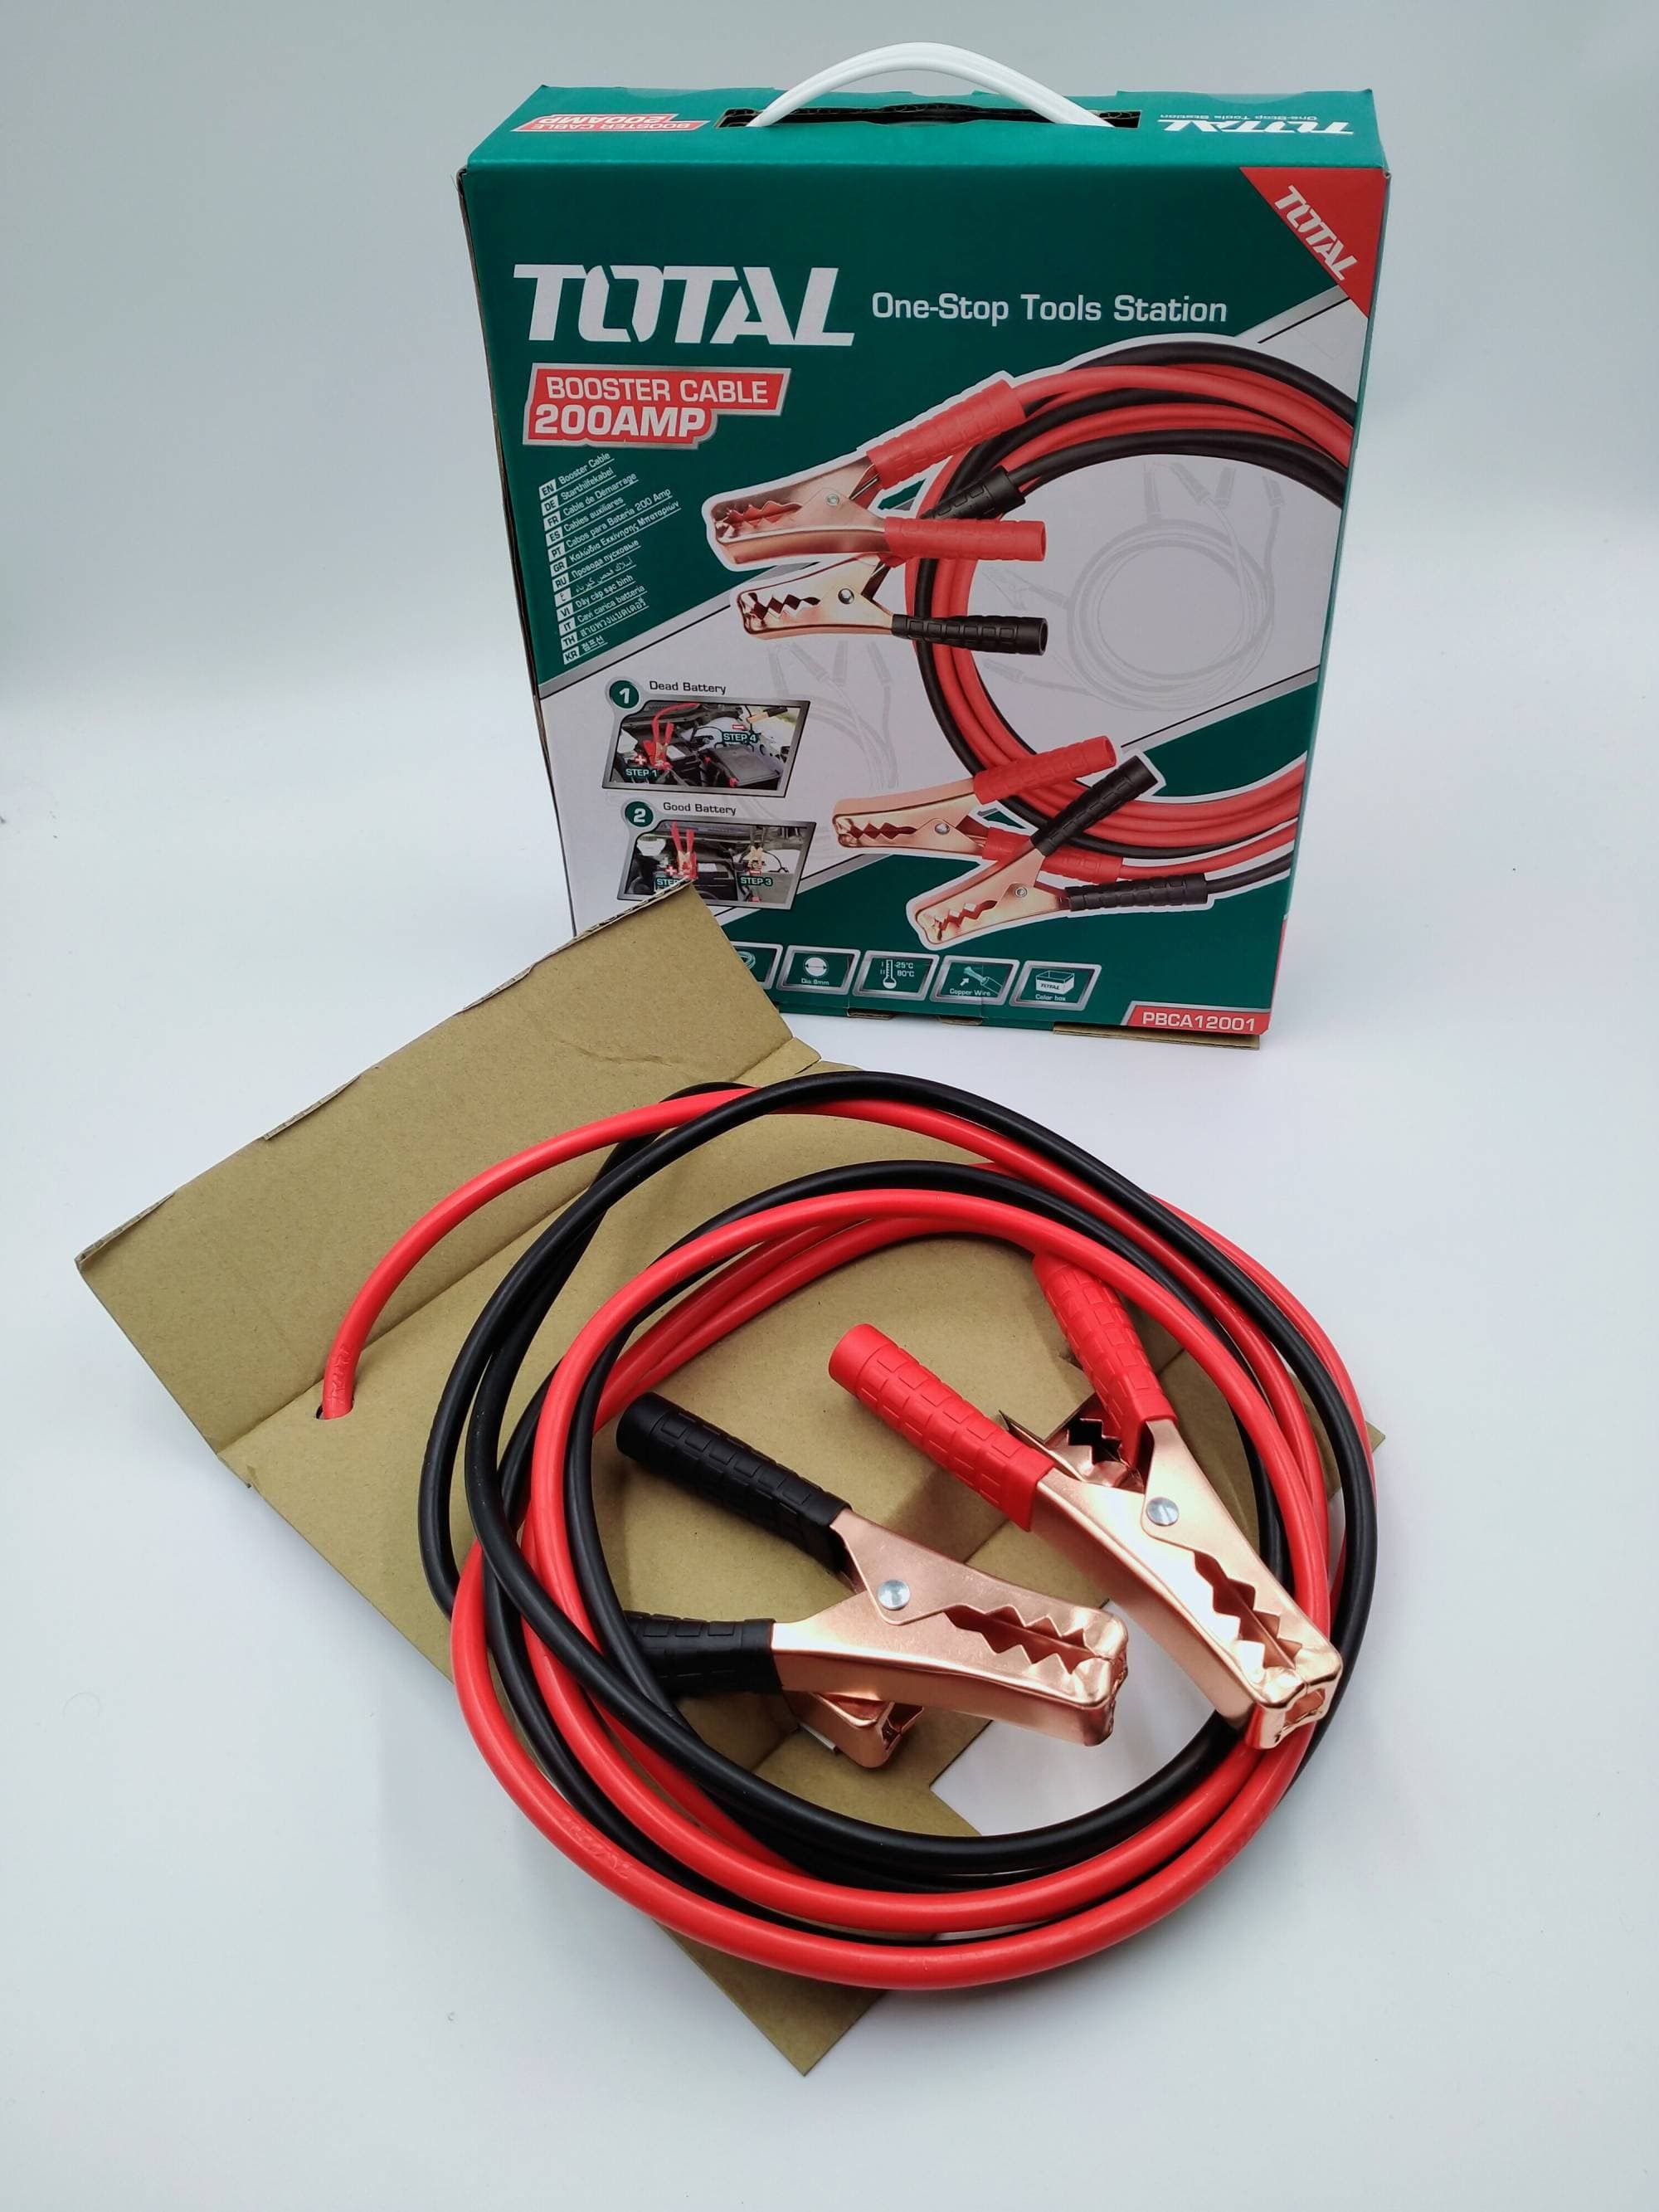 Total Booster cable 200AMP -  PBCA12001 | Supply Master | Accra, Ghana Tools Building Steel Engineering Hardware tool